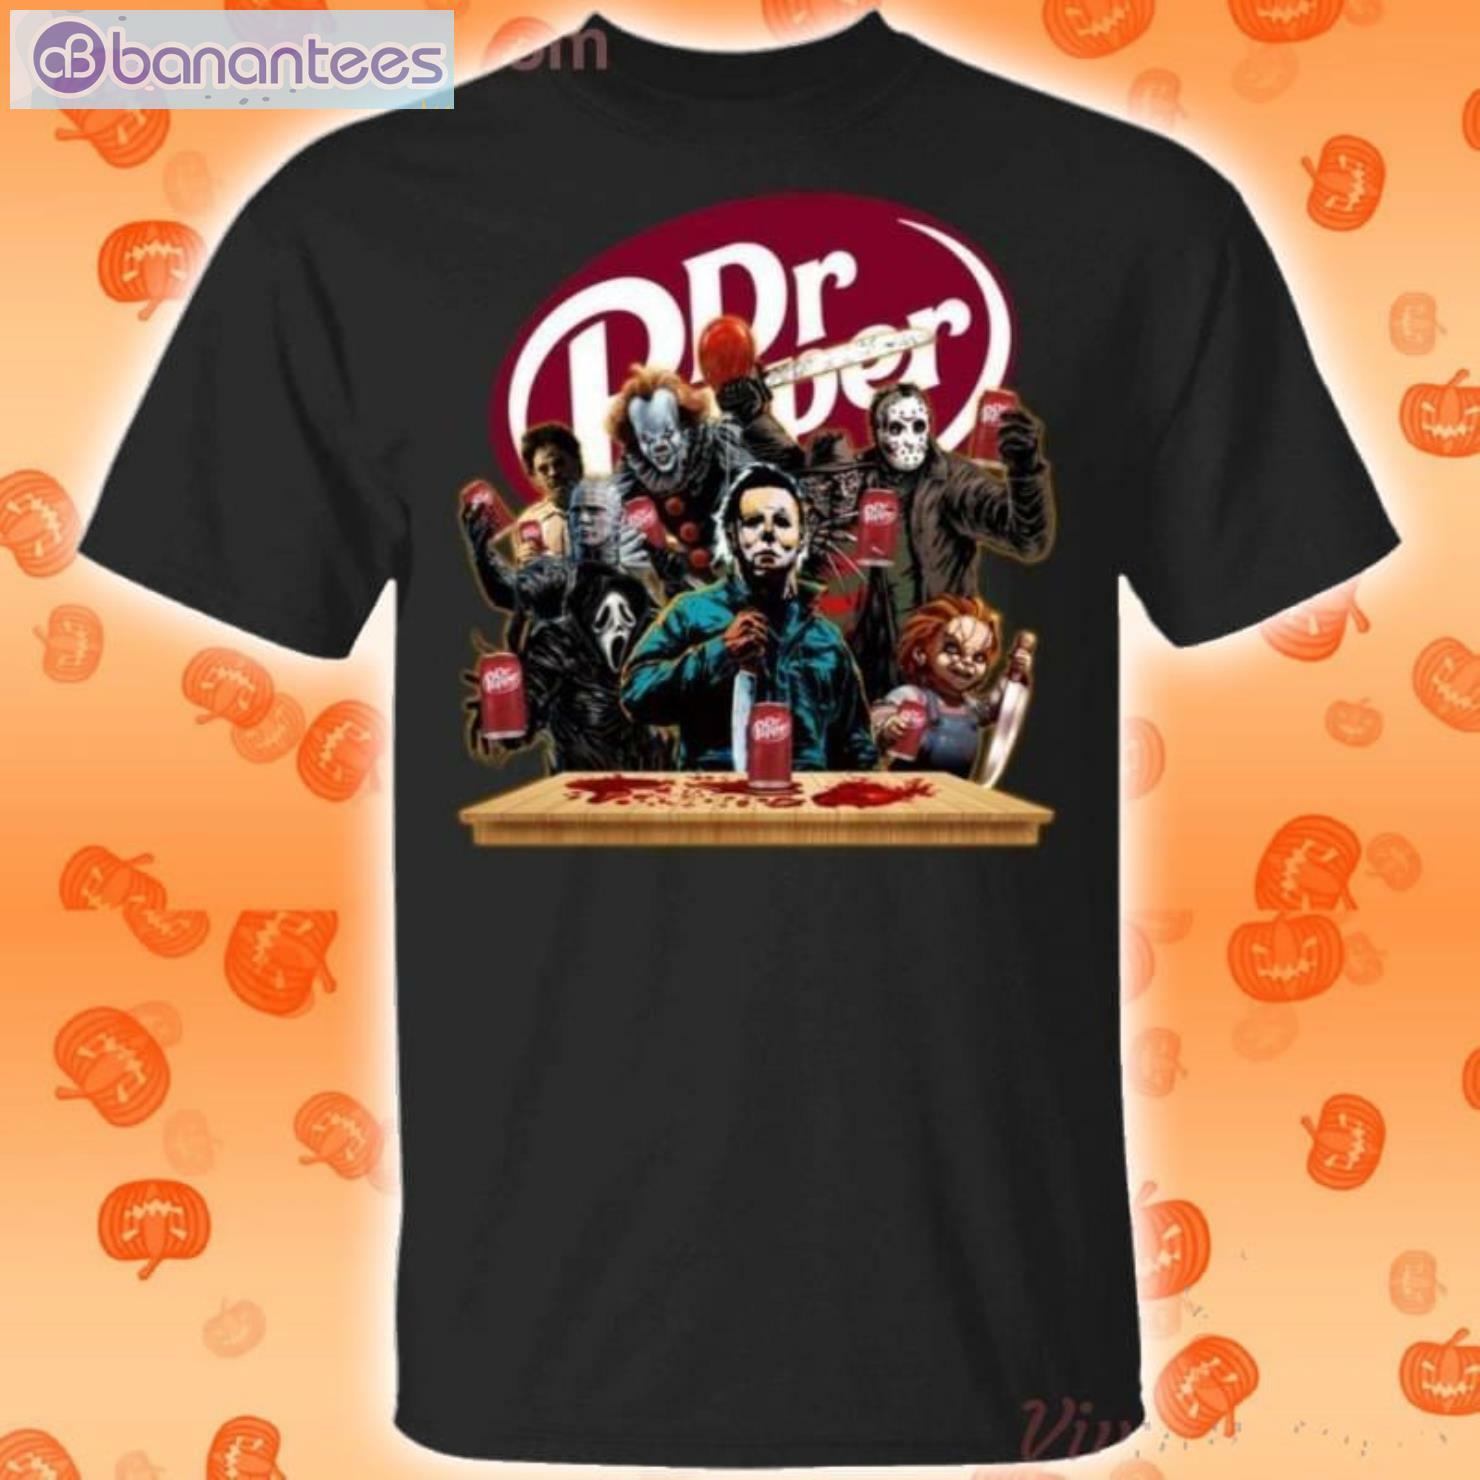 Horror Characters Drinking Dr Pepper Funny T-Shirt Product Photo 1 Product photo 1